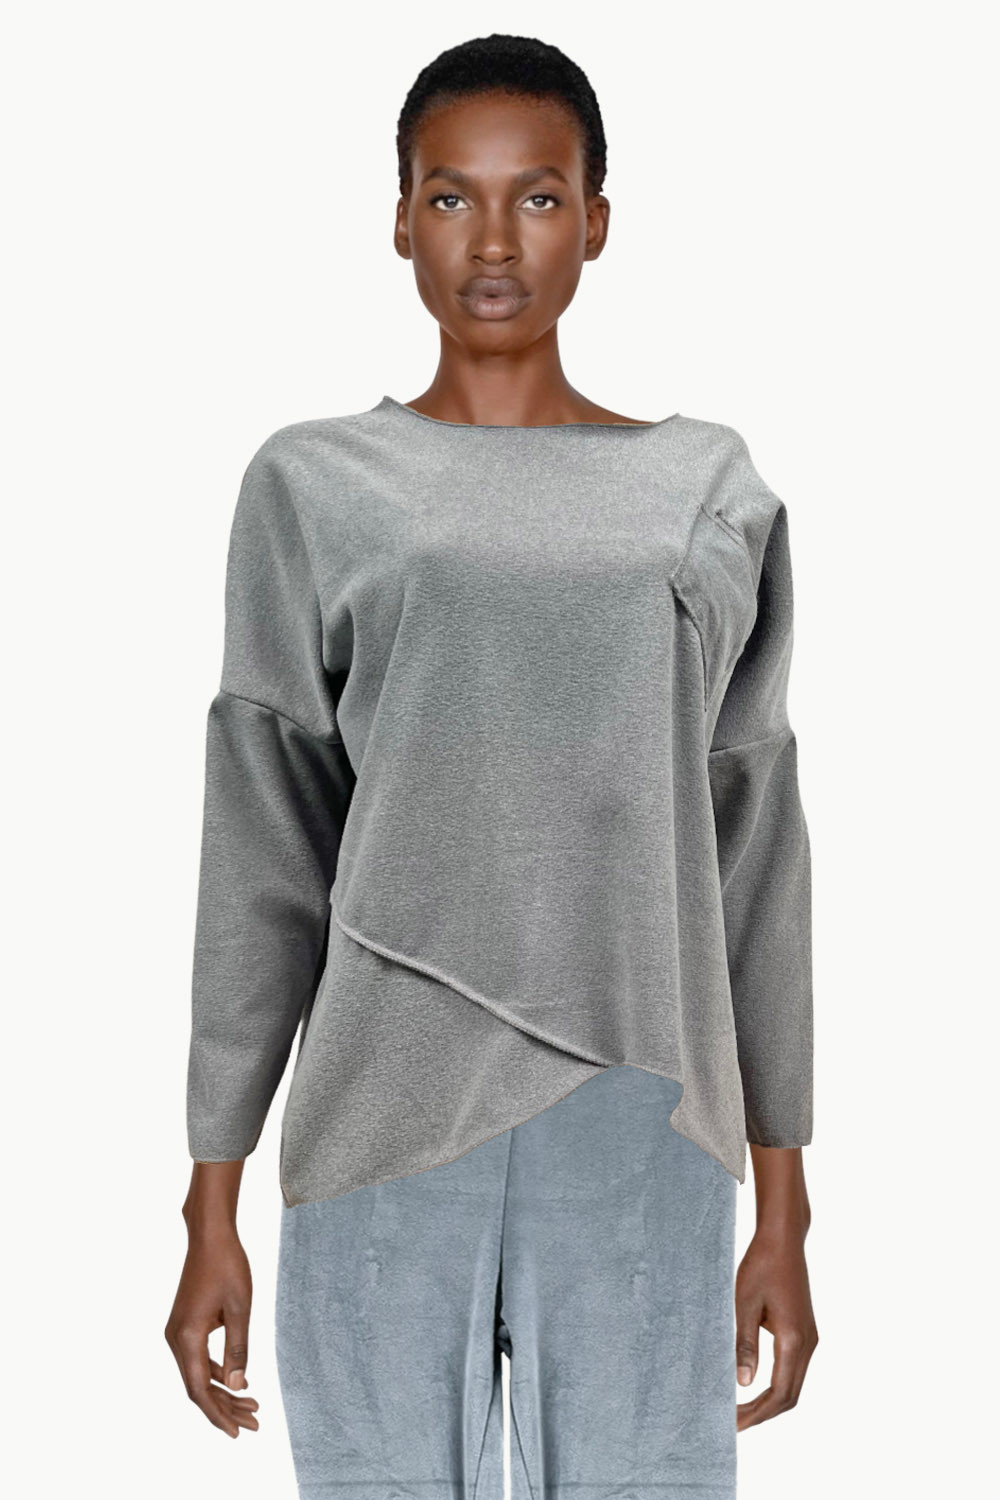 Gray sweater with three quarter sleeves